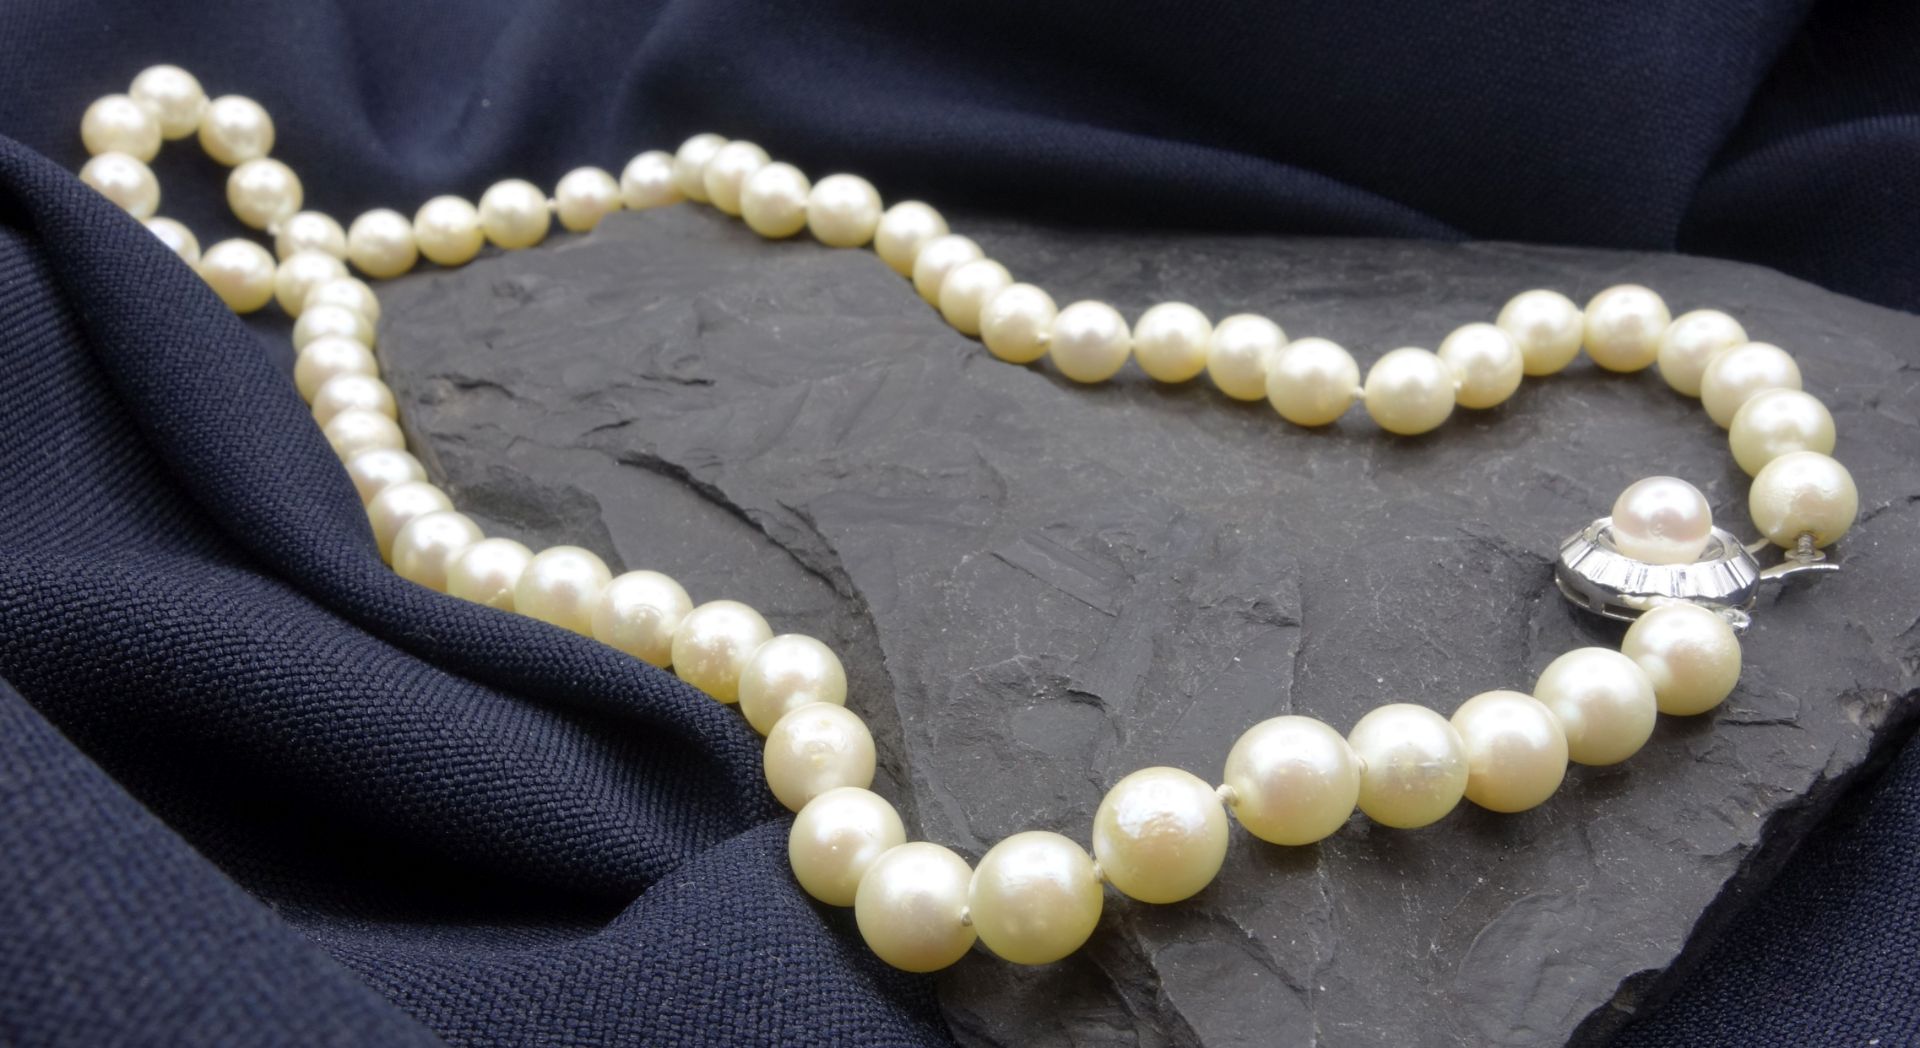 Pearl necklace - Image 2 of 5